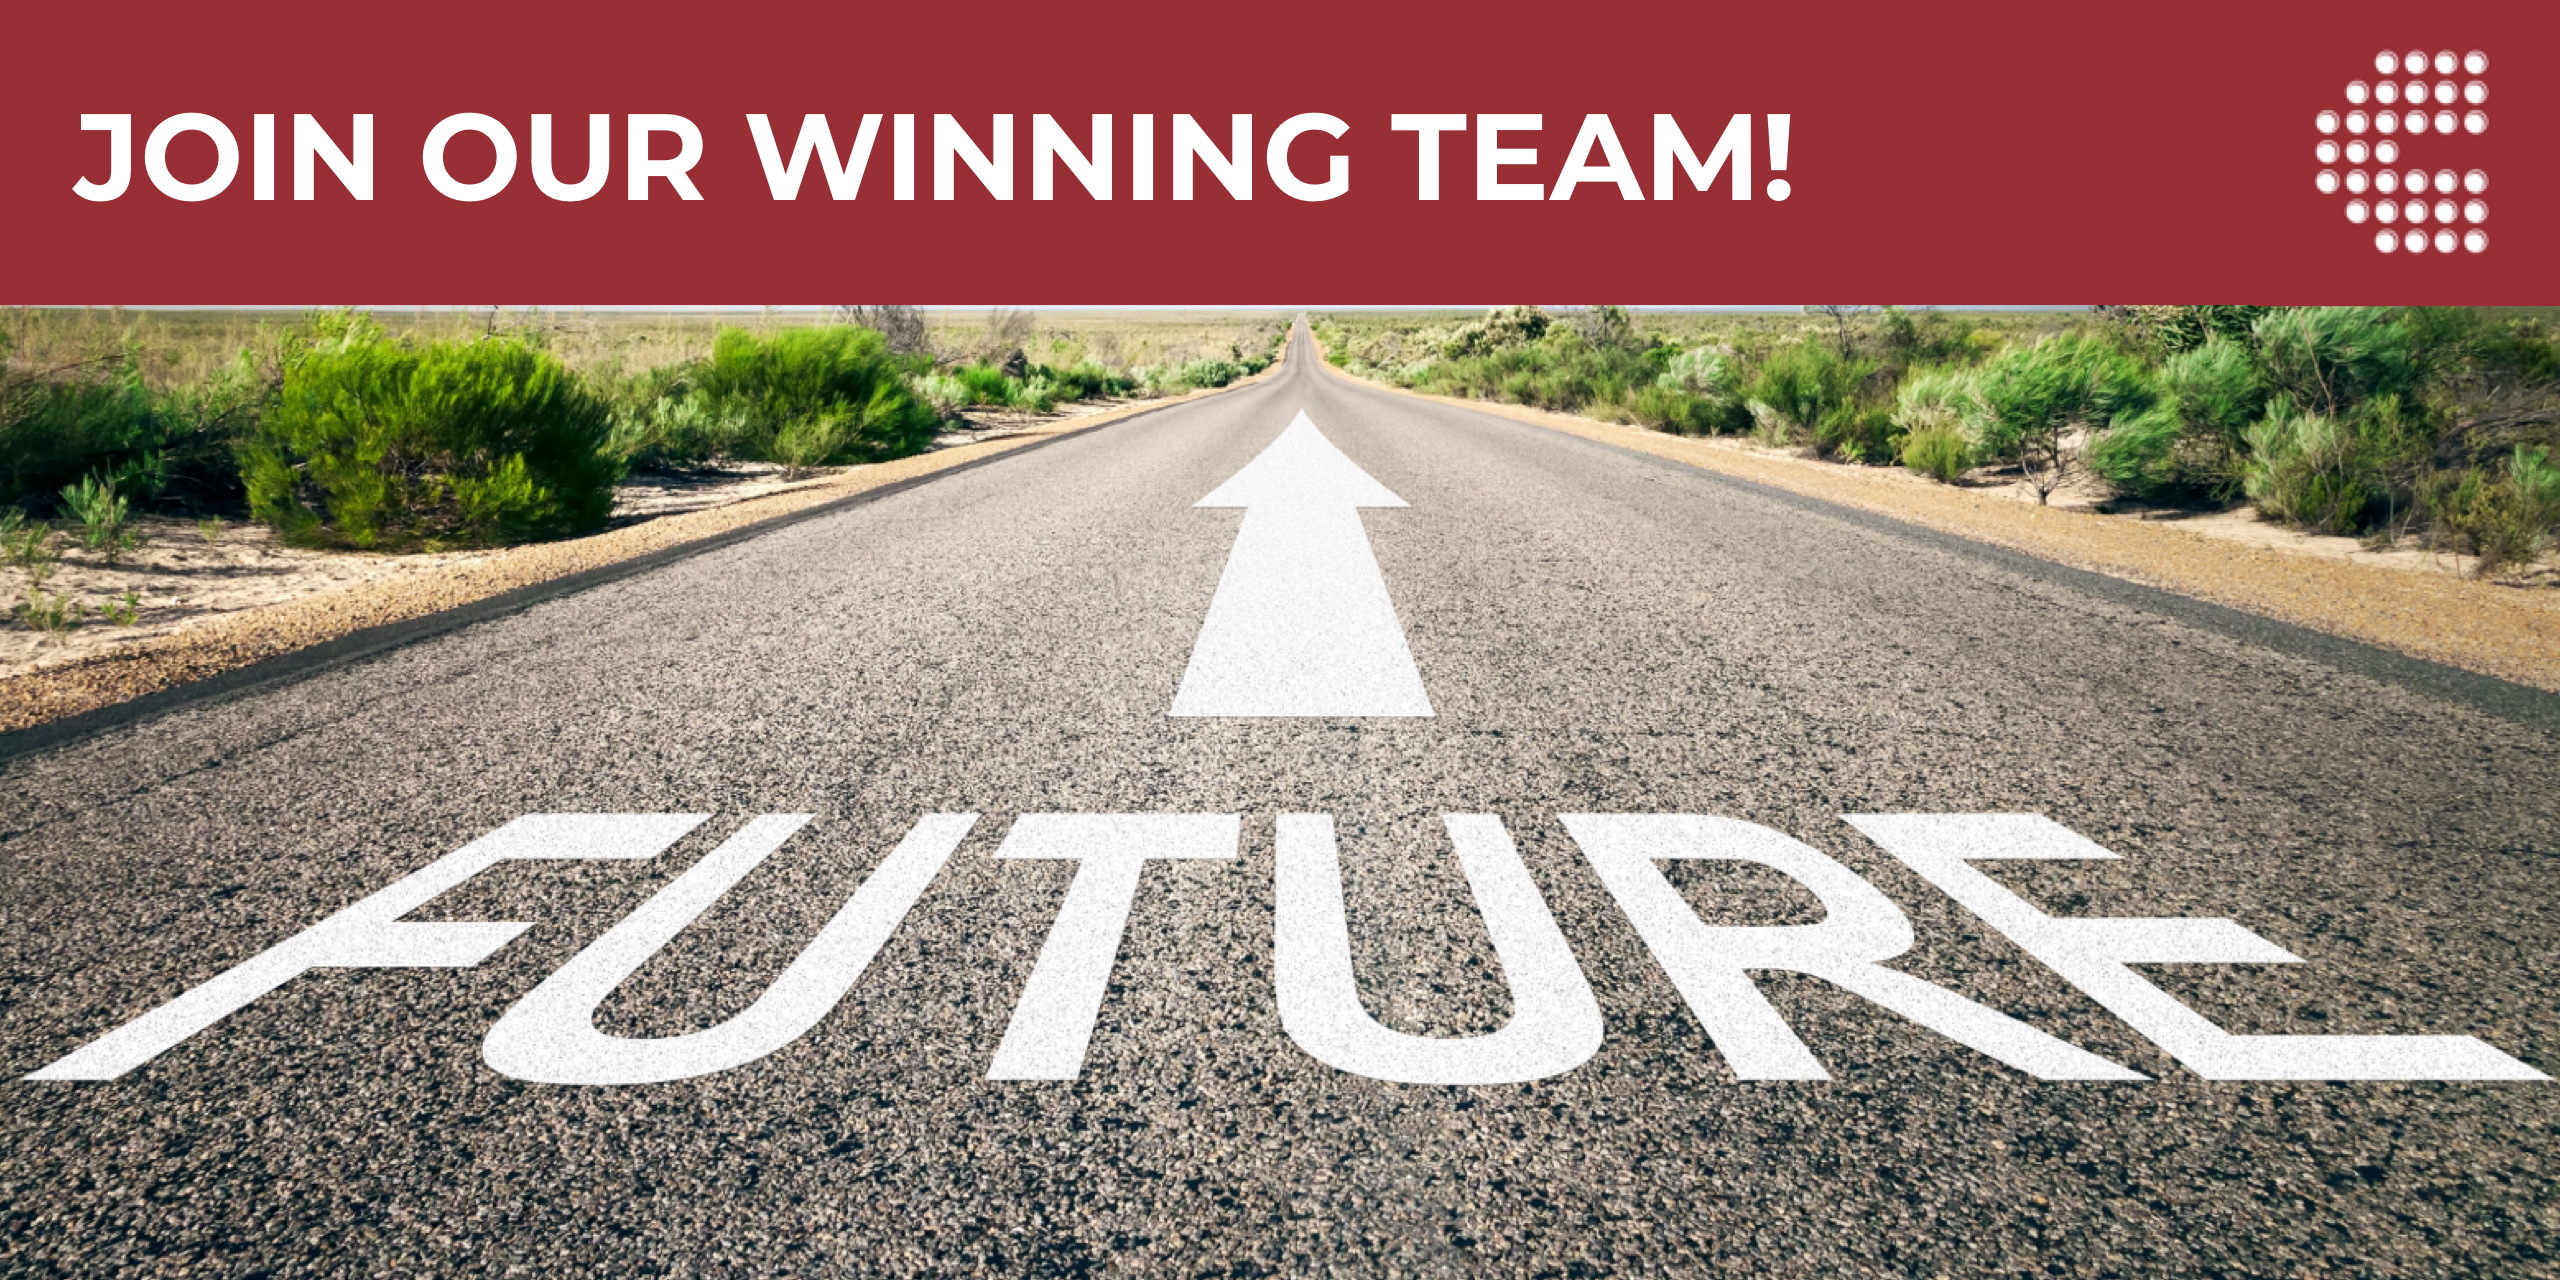 Join Our Winning Team, Future Ahead!